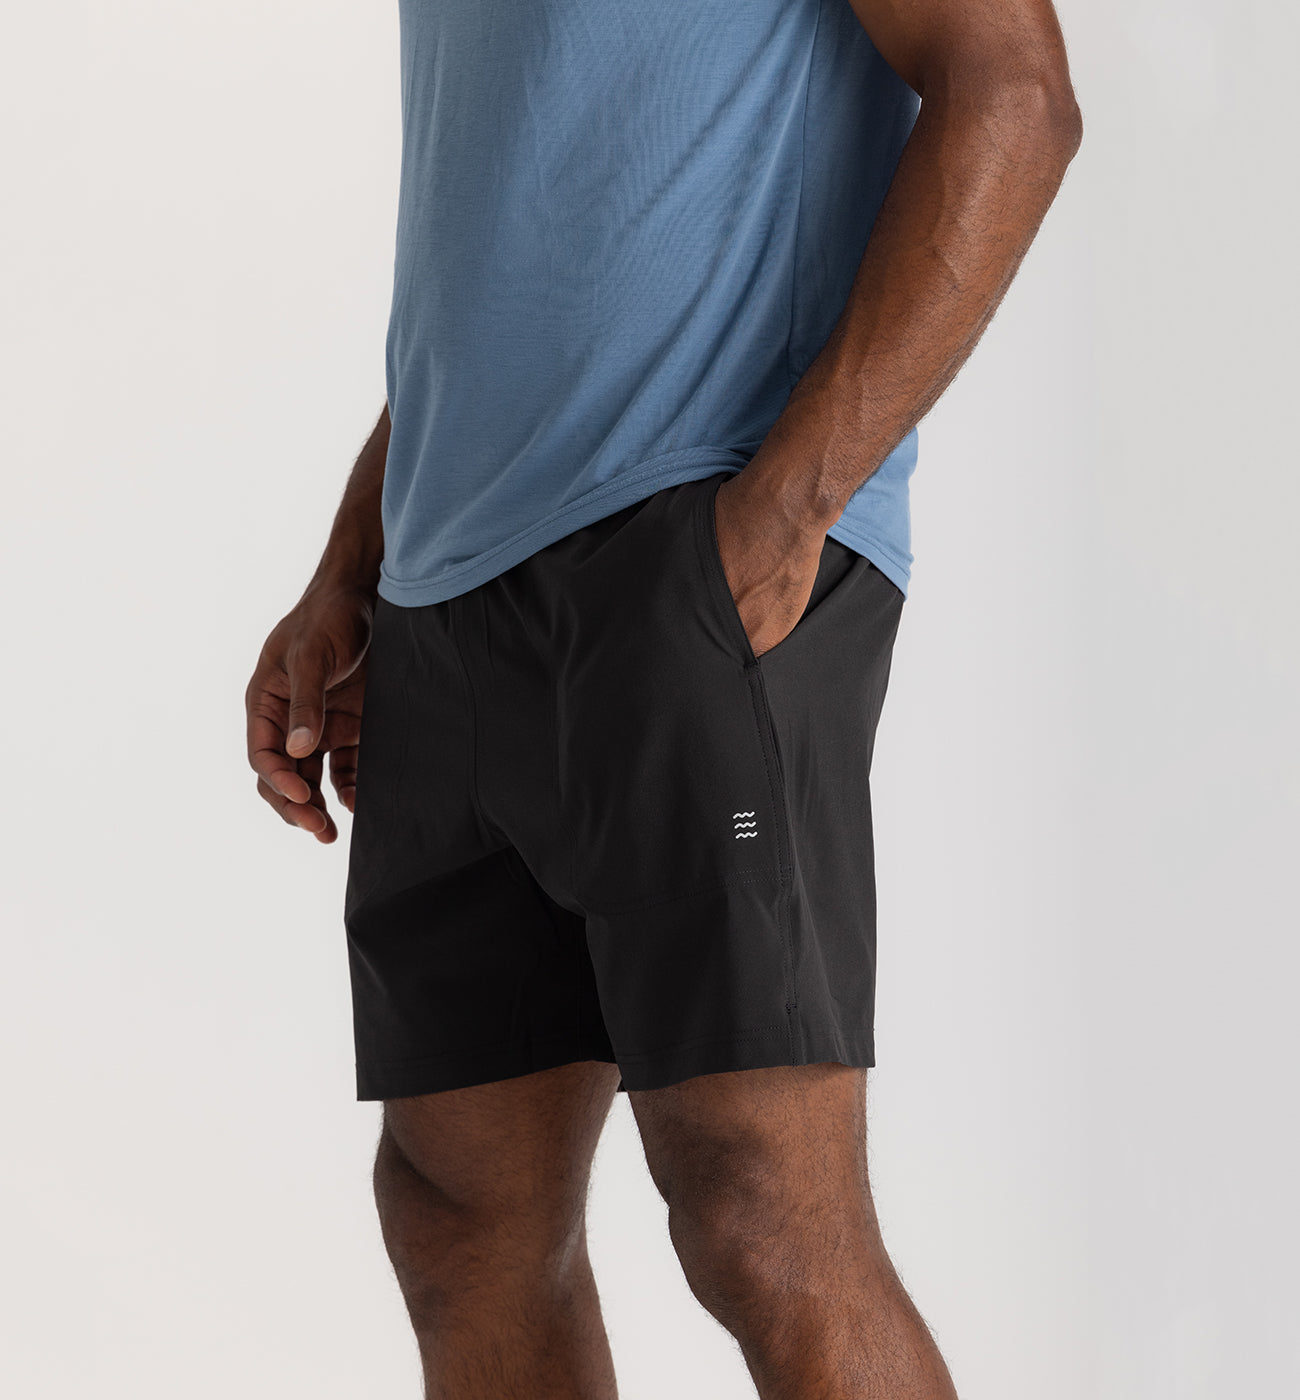 Men's Bamboo-Lined Active Breeze Short – 7 - Black – Free Fly Apparel